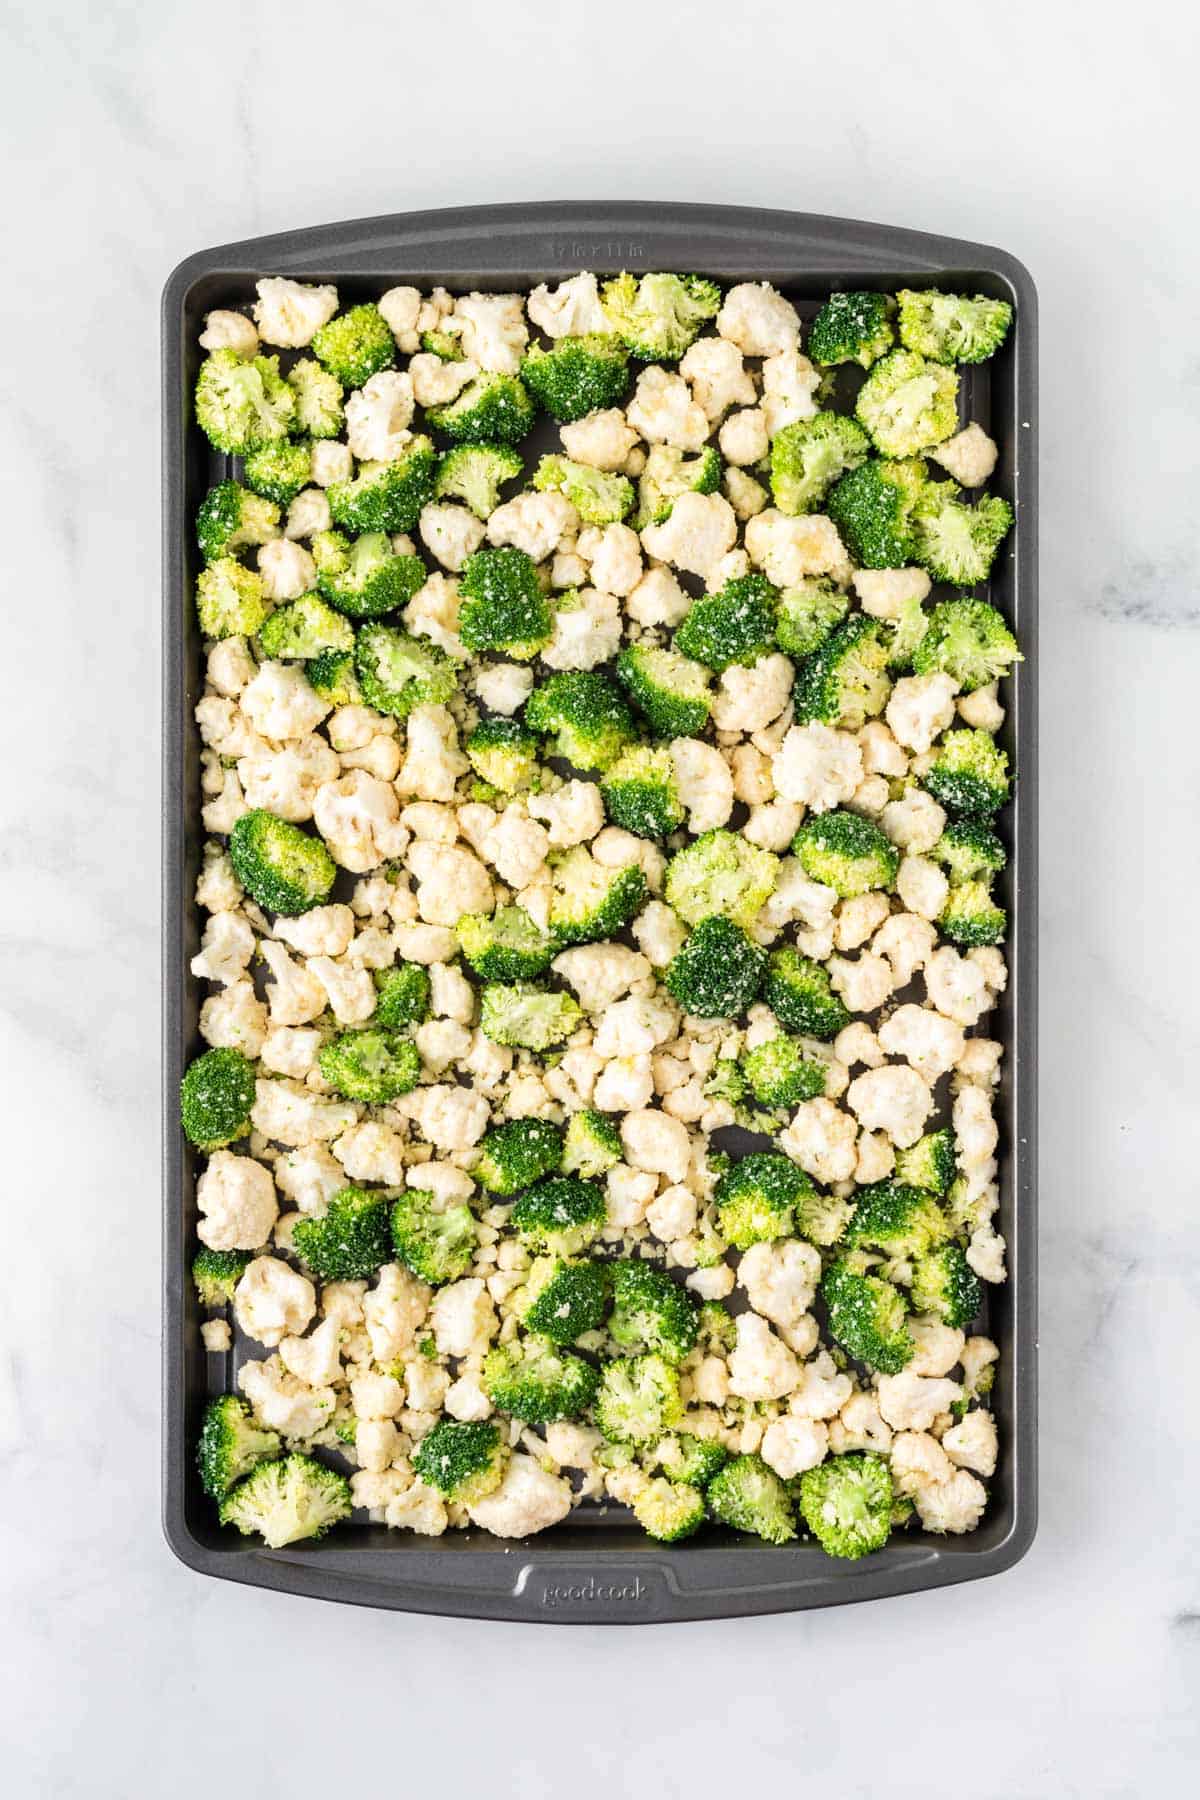 placing the broccoli and cauliflower on a baking sheet